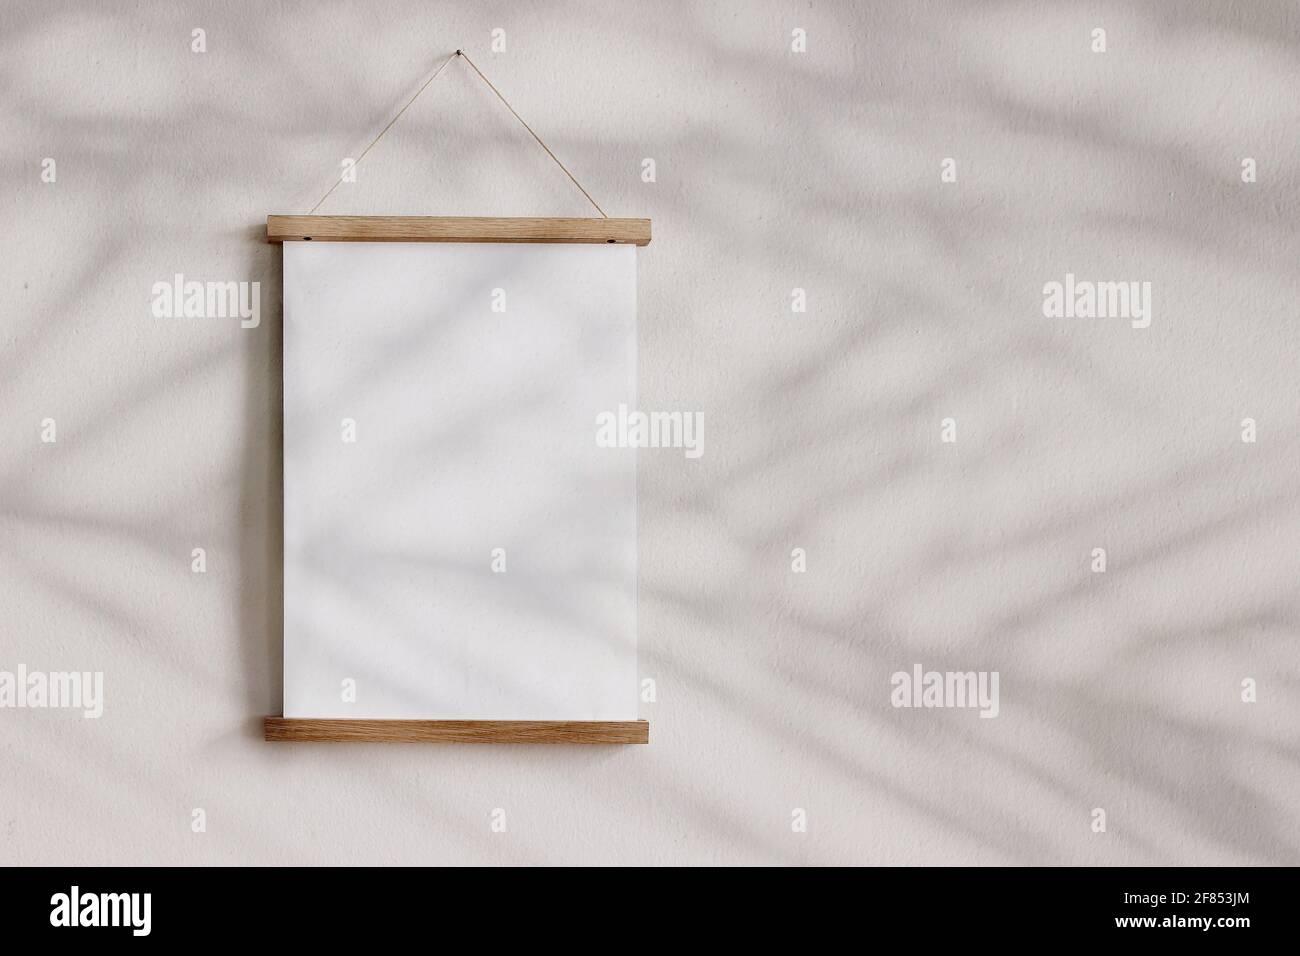 Blank wooden picture frame hanging on beige wall. Empty poster mockup for art display in sunlight. Minimal interior design.Palm leaves shadow overlay Stock Photo